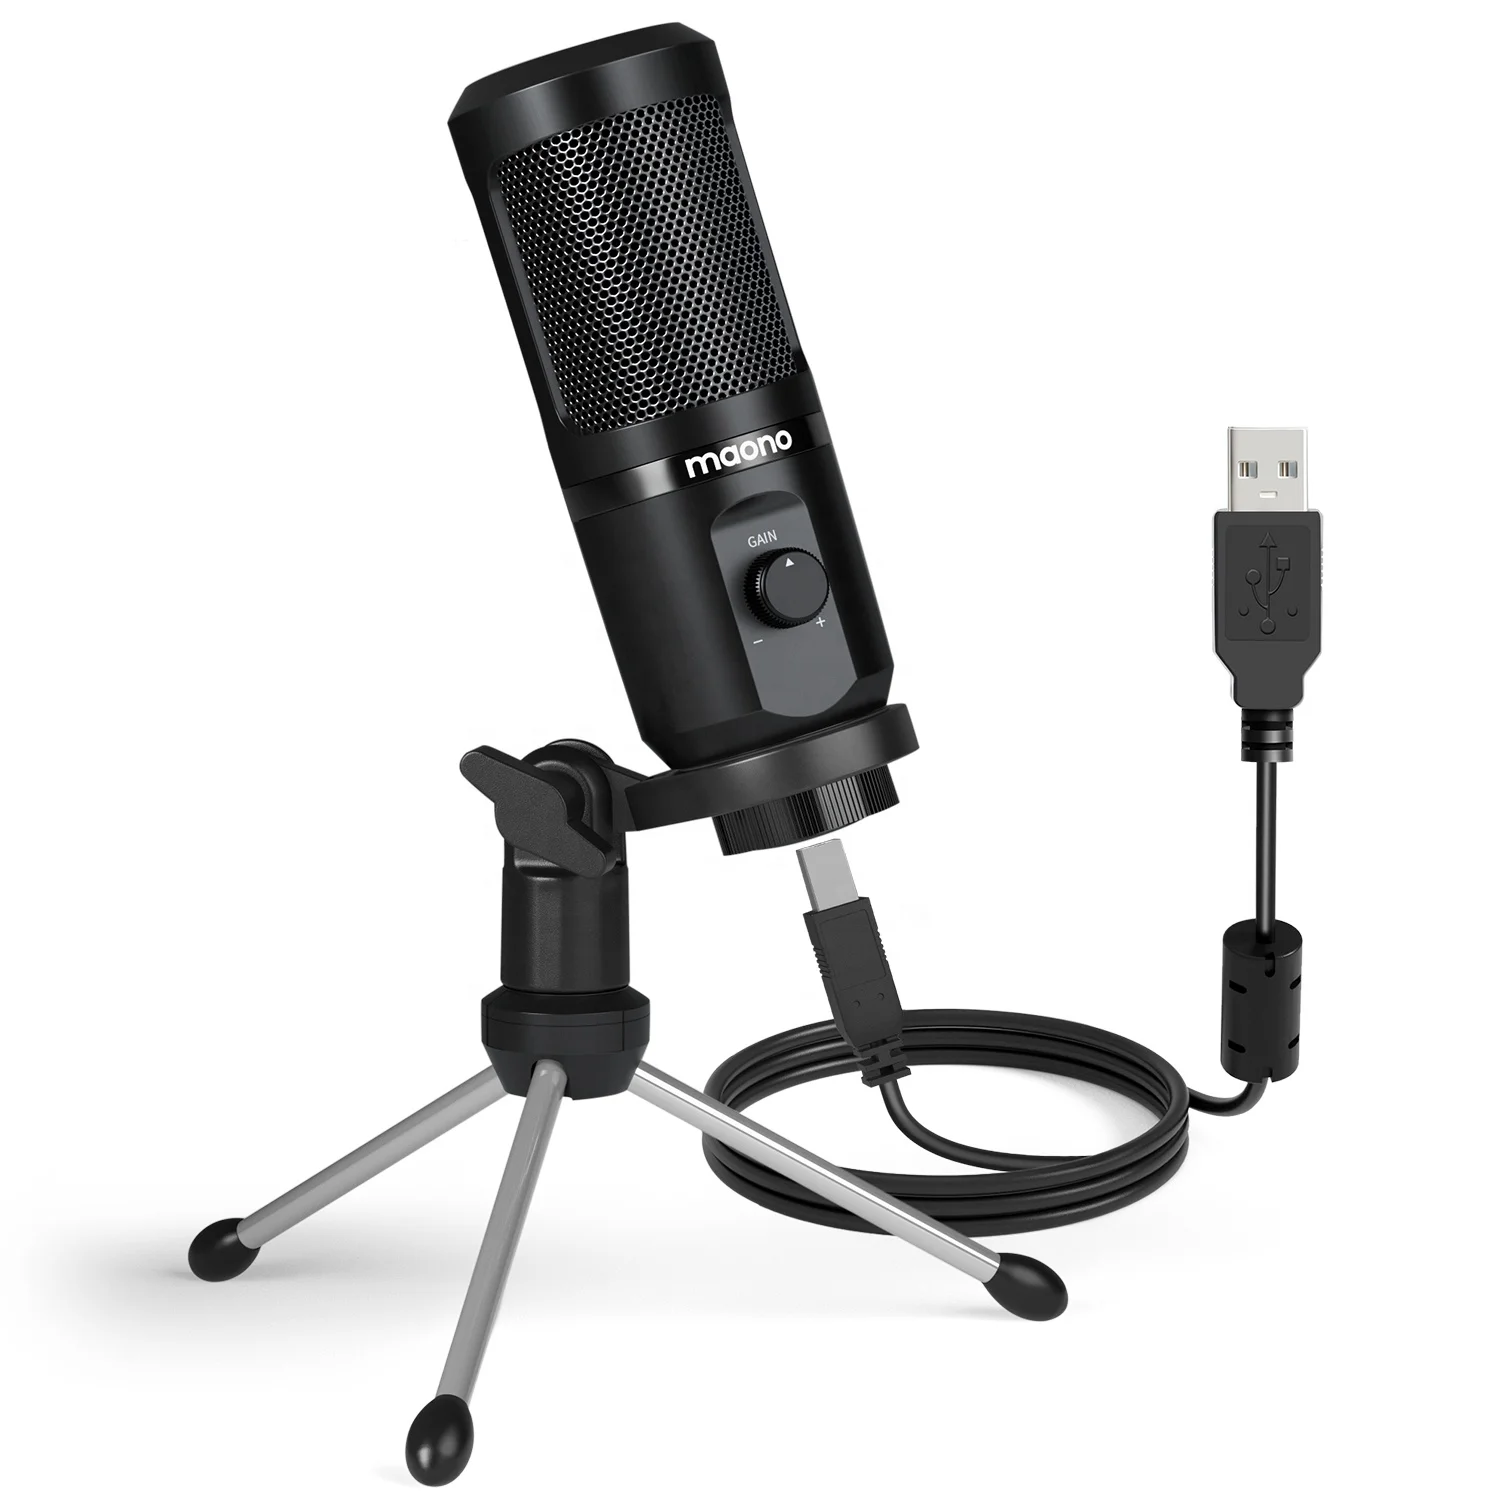 

karaoke unidirectional electret condenser microphone bm-800 with usb voice recorder microphone